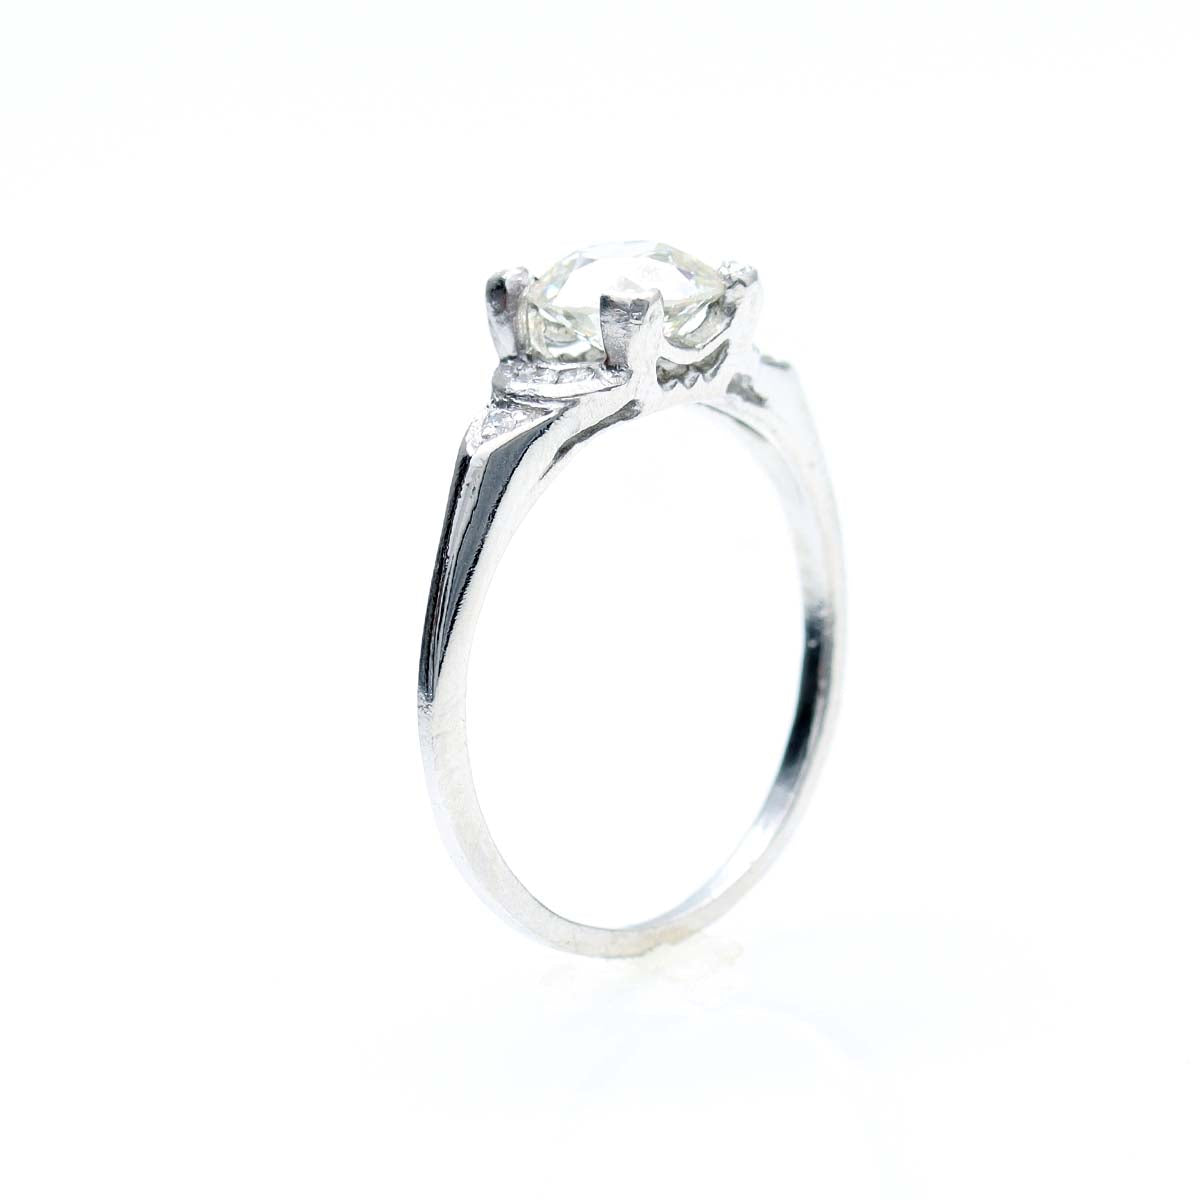 Replica Art Deco Engagement Ring with Old European Cut Diamond #3024-5